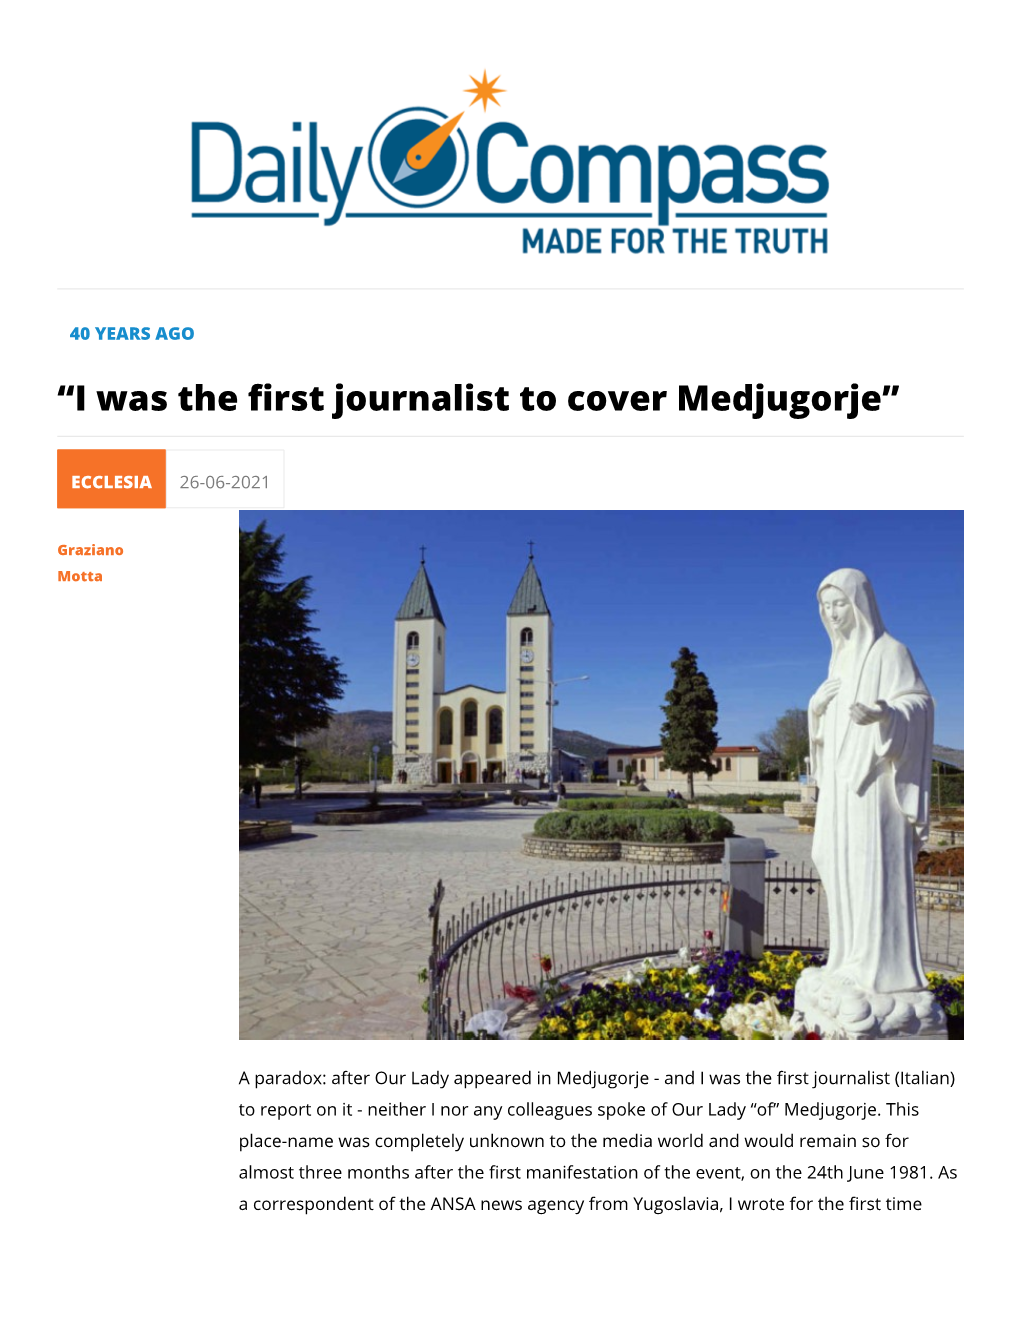 “I Was the First Journalist to Cover Medjugorje”